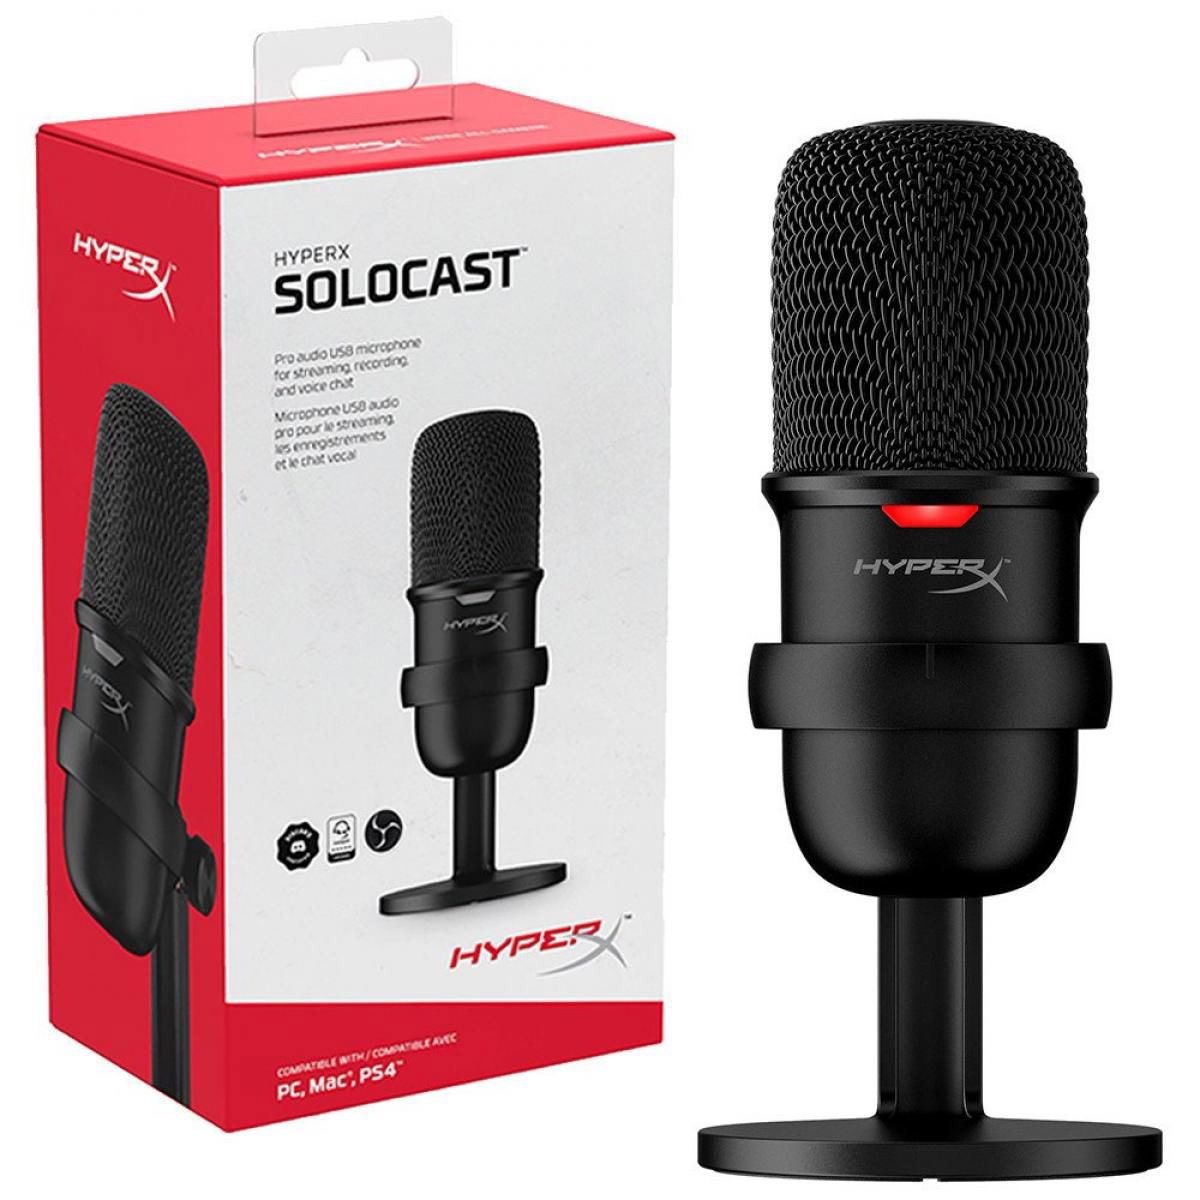 HyperX SoloCast USB Condenser Gaming Microphone, for PC, PS4, Mac